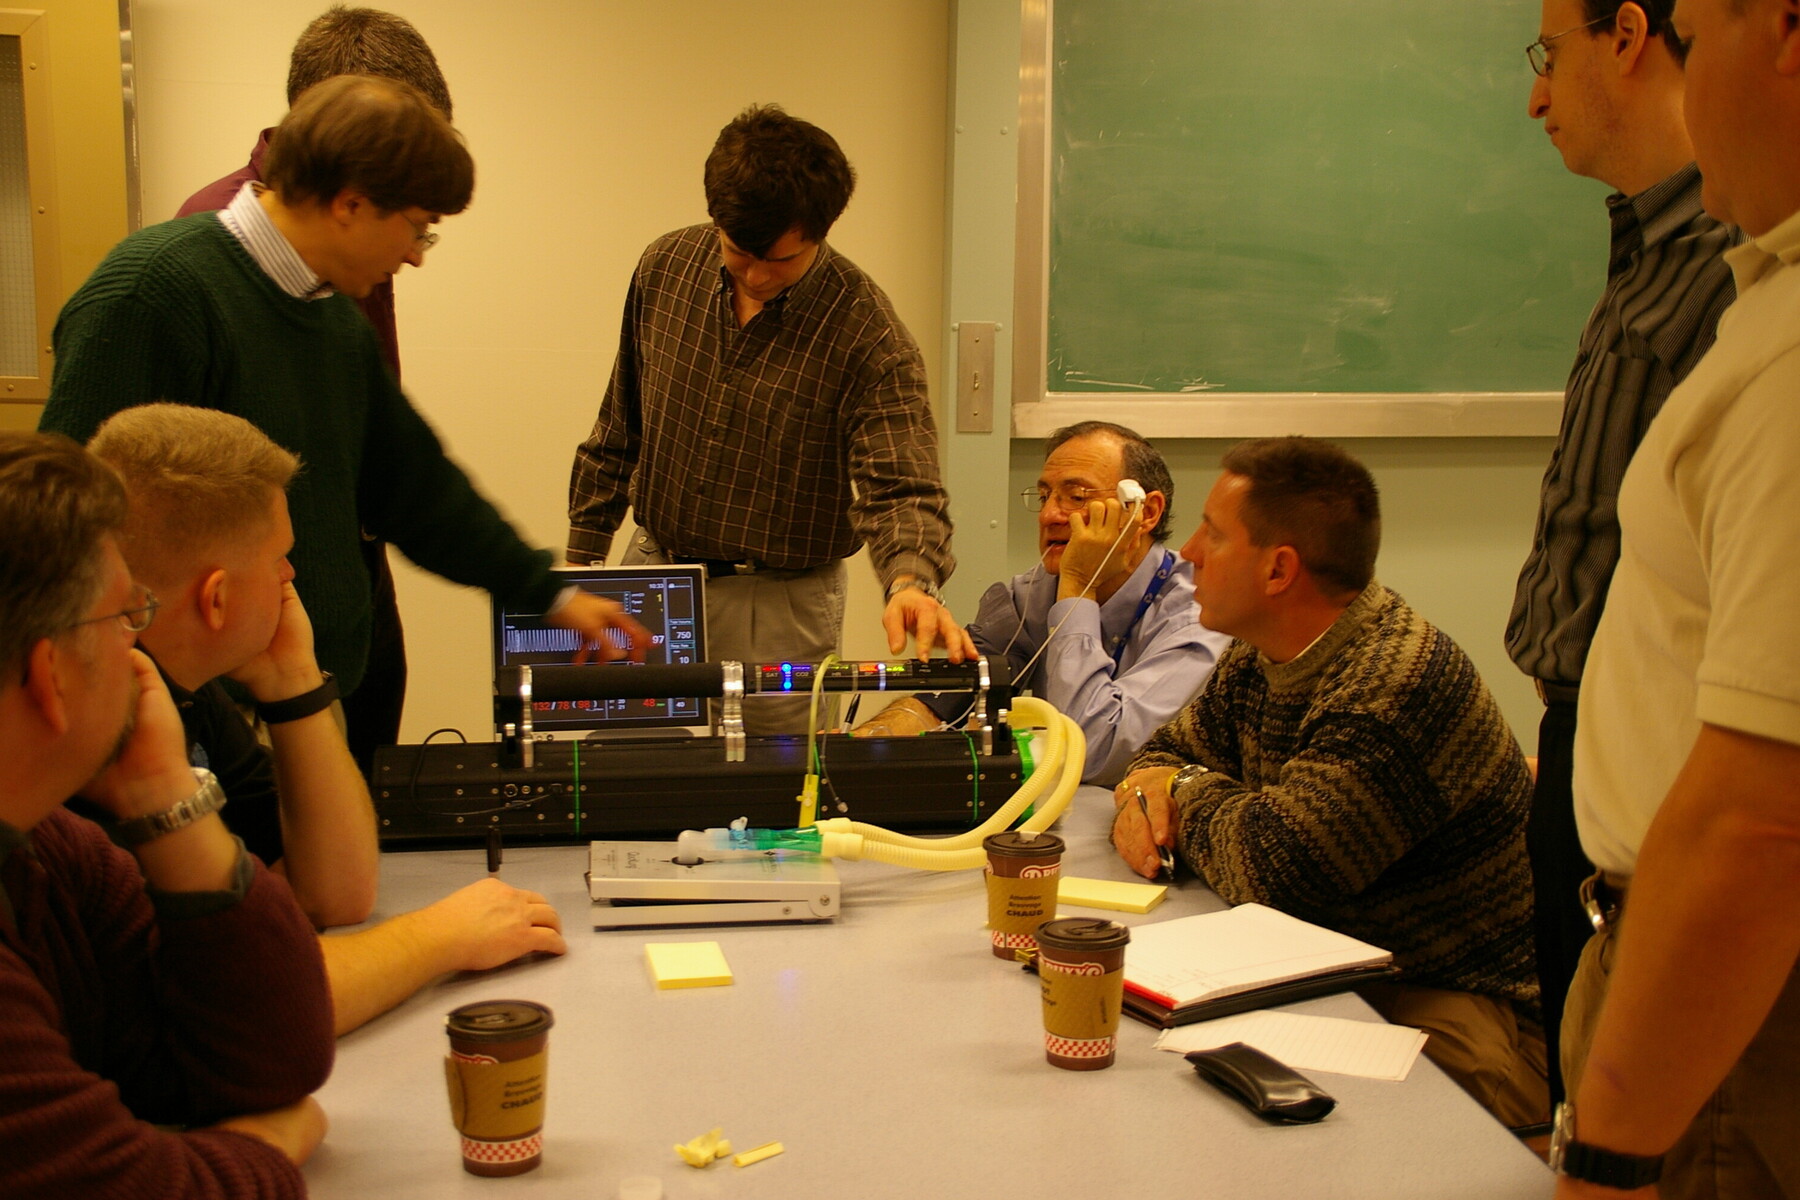 A group of researchers around a table, with one researcher testing the machine. The tester is wearing a finger sensor.